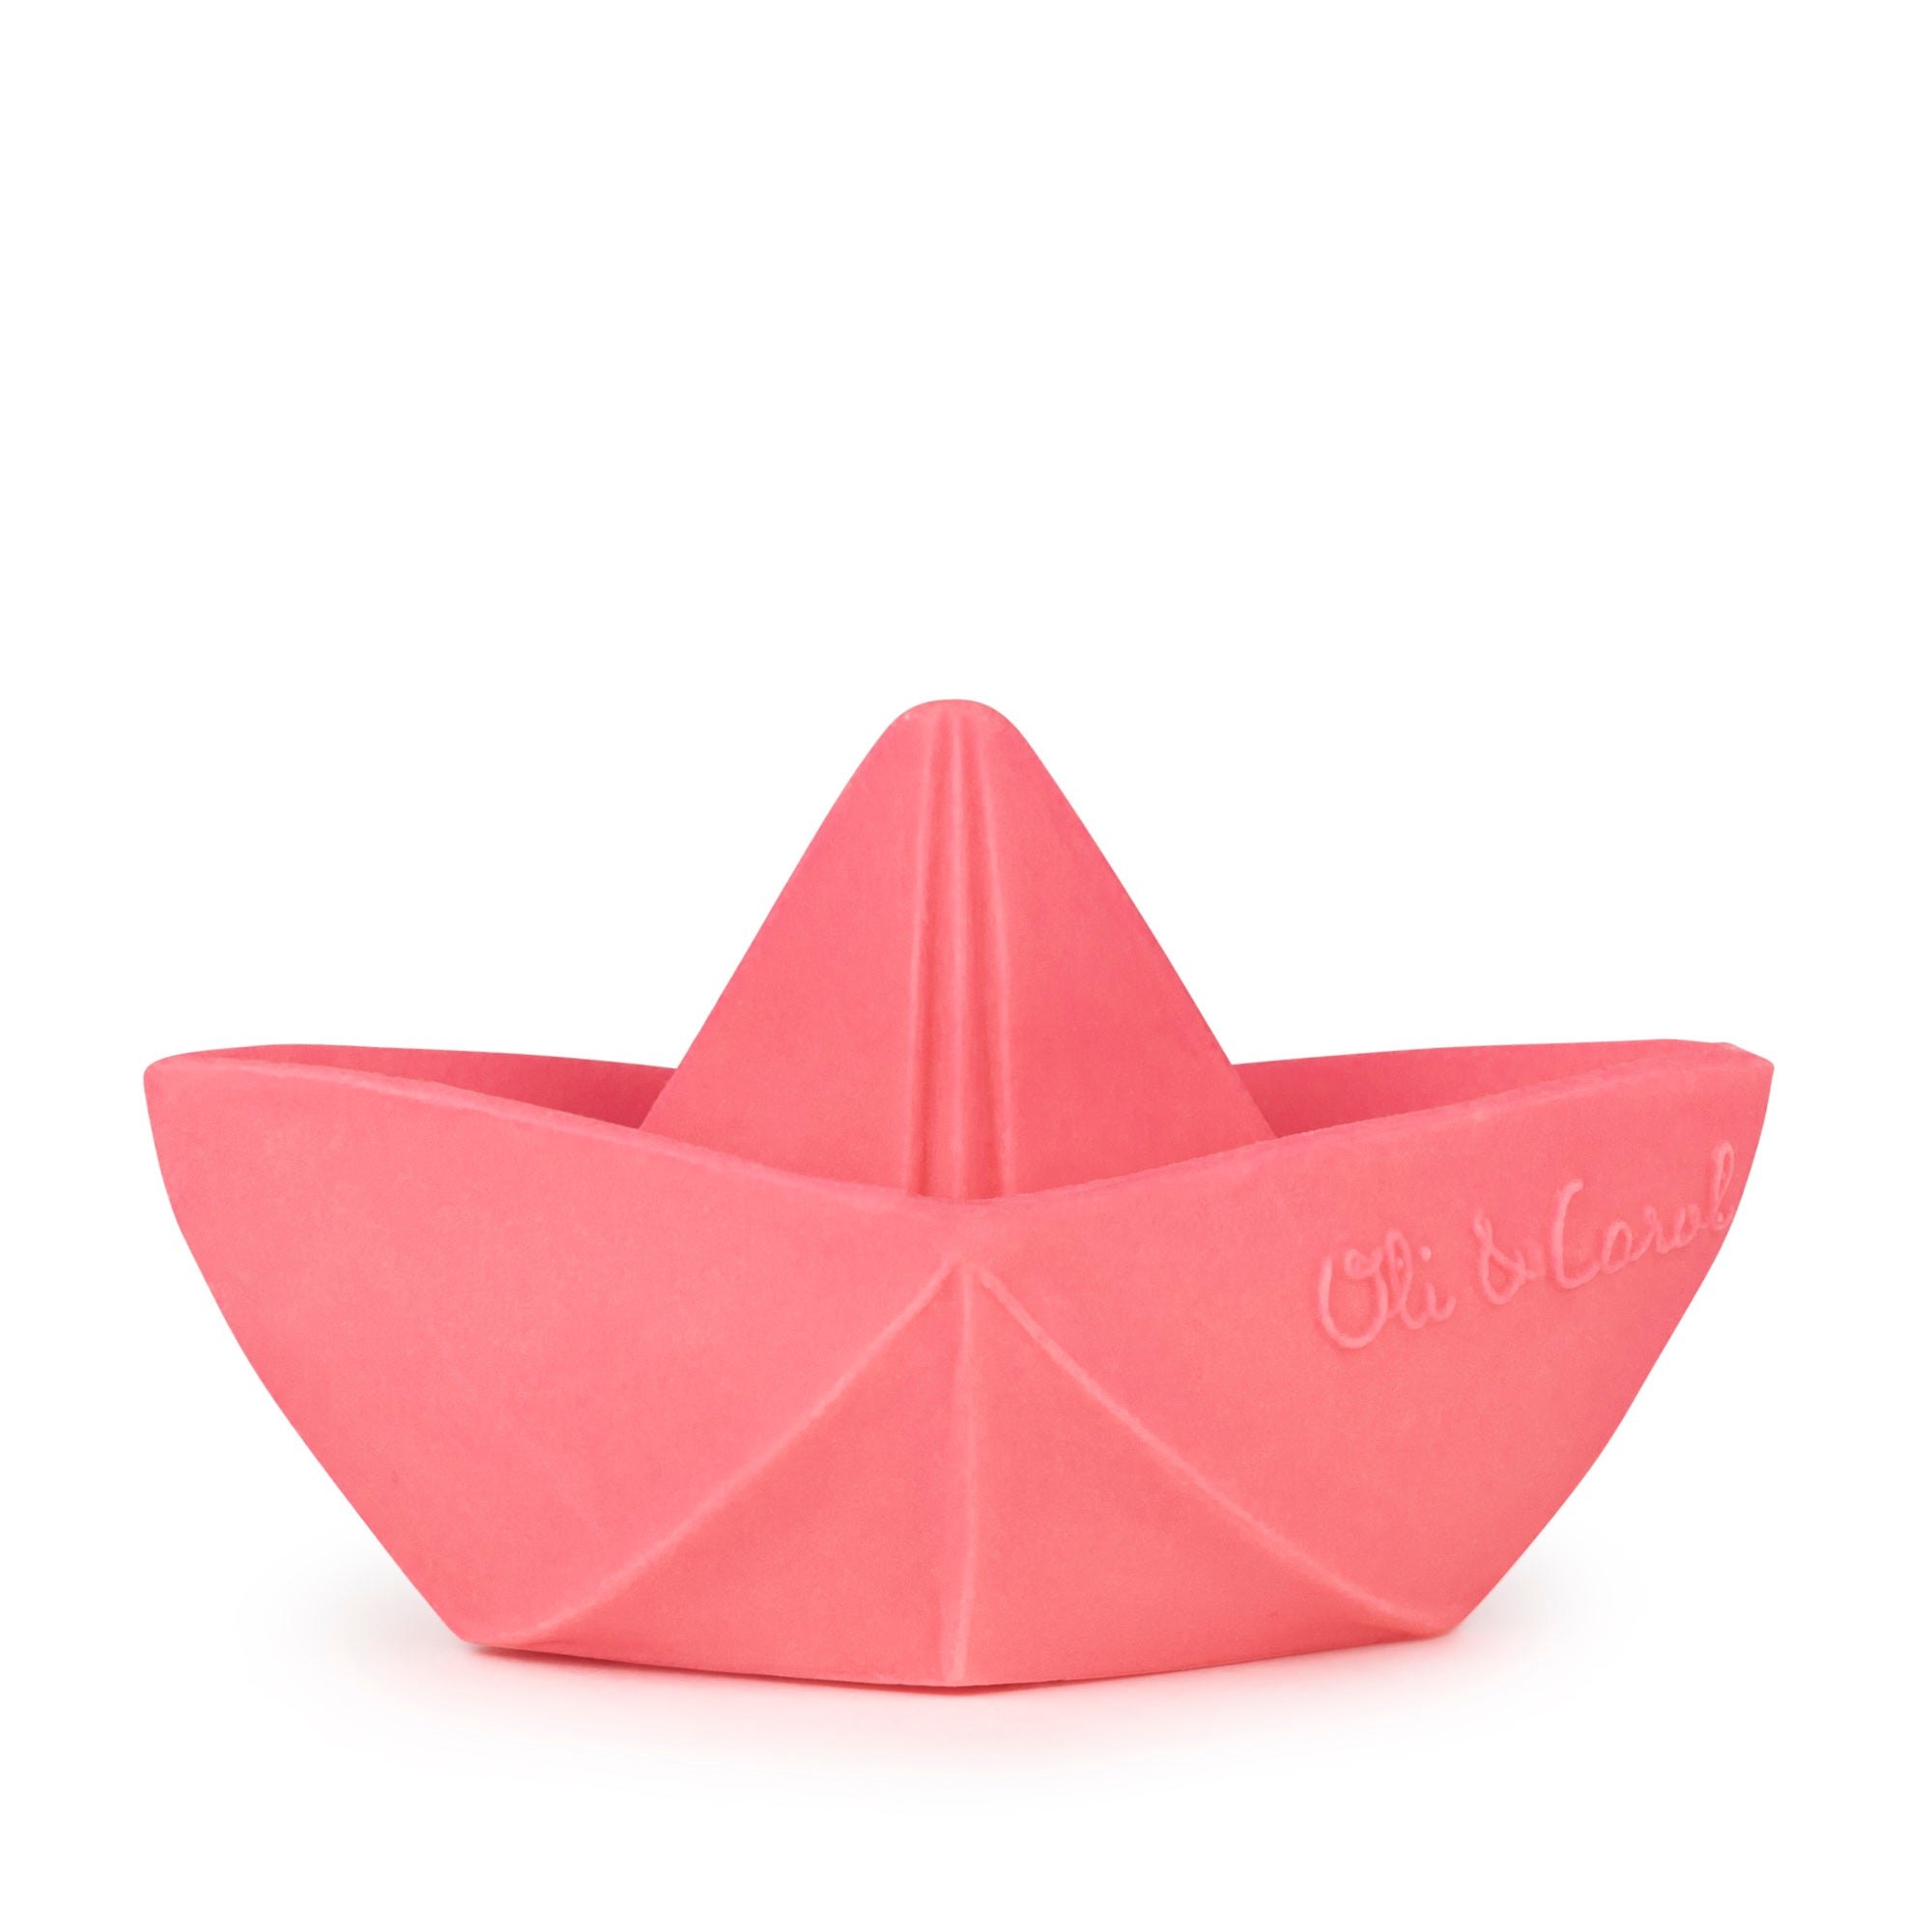 Origami Boat Pink - Where The Sidewalk Ends Toy Shop